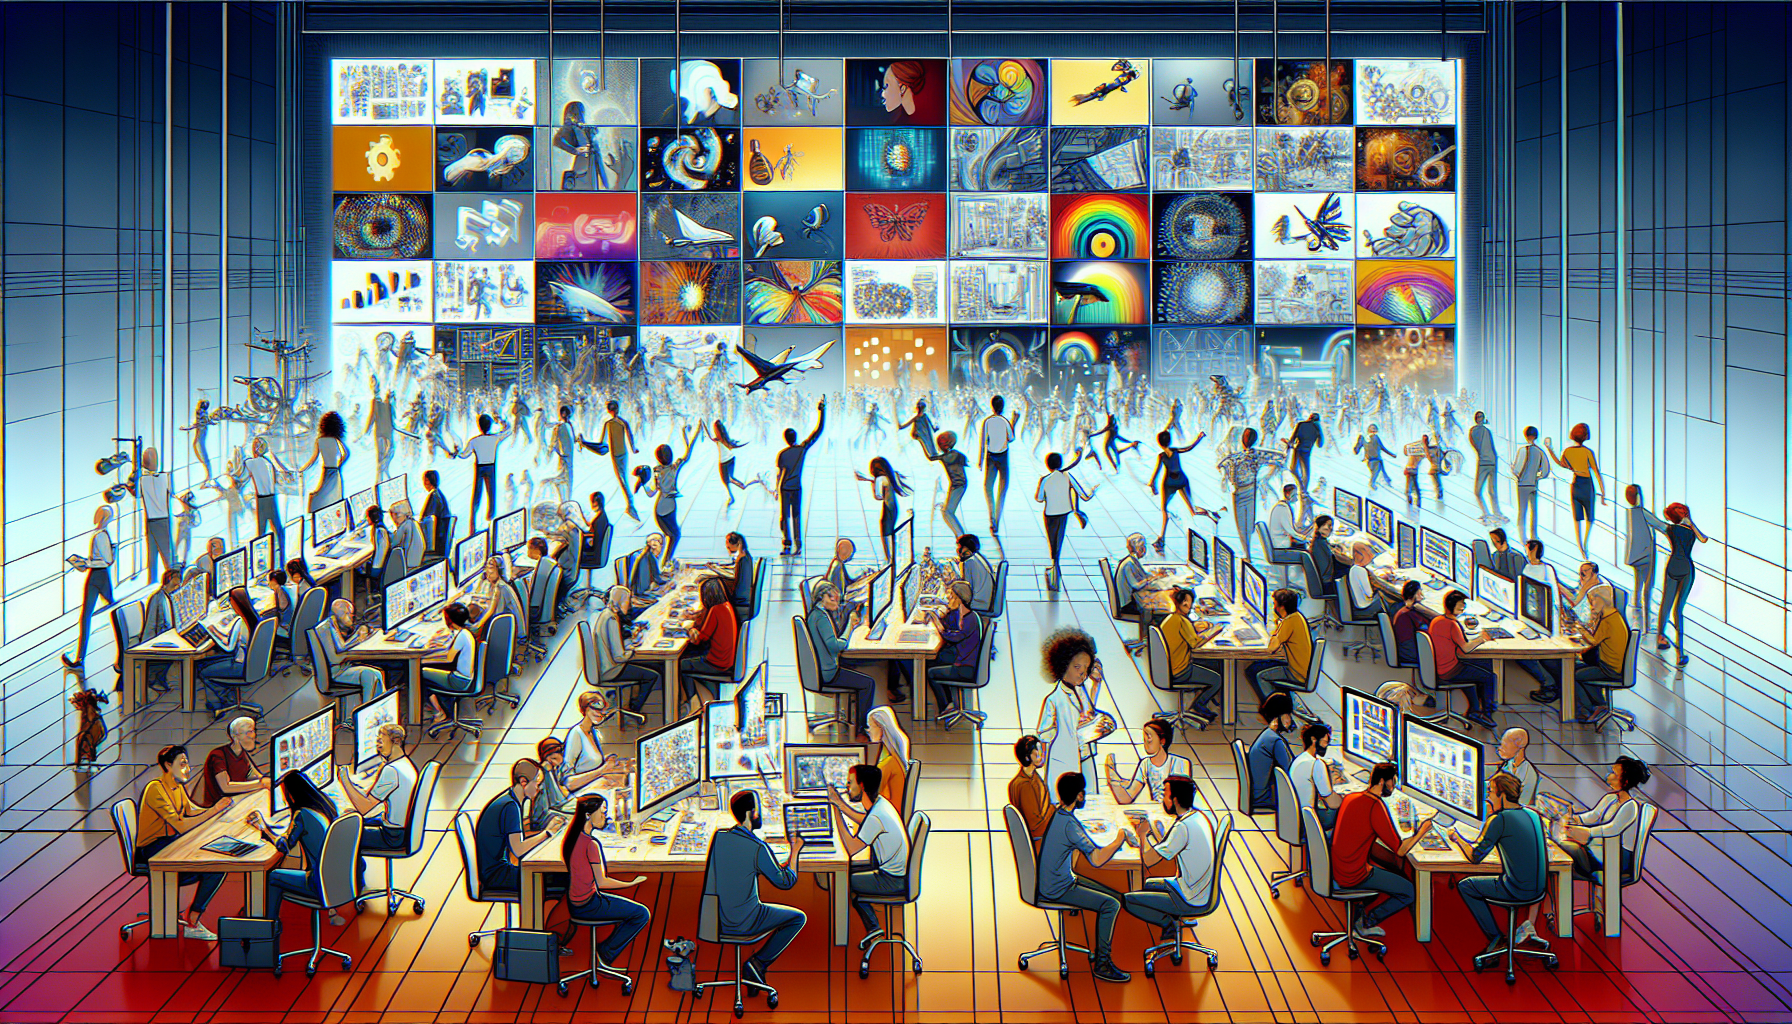 A digital painting of a modern, bustling animation studio, filled with diverse animators and artists brainstorming and designing around large screens displaying classic and modern animated characters.